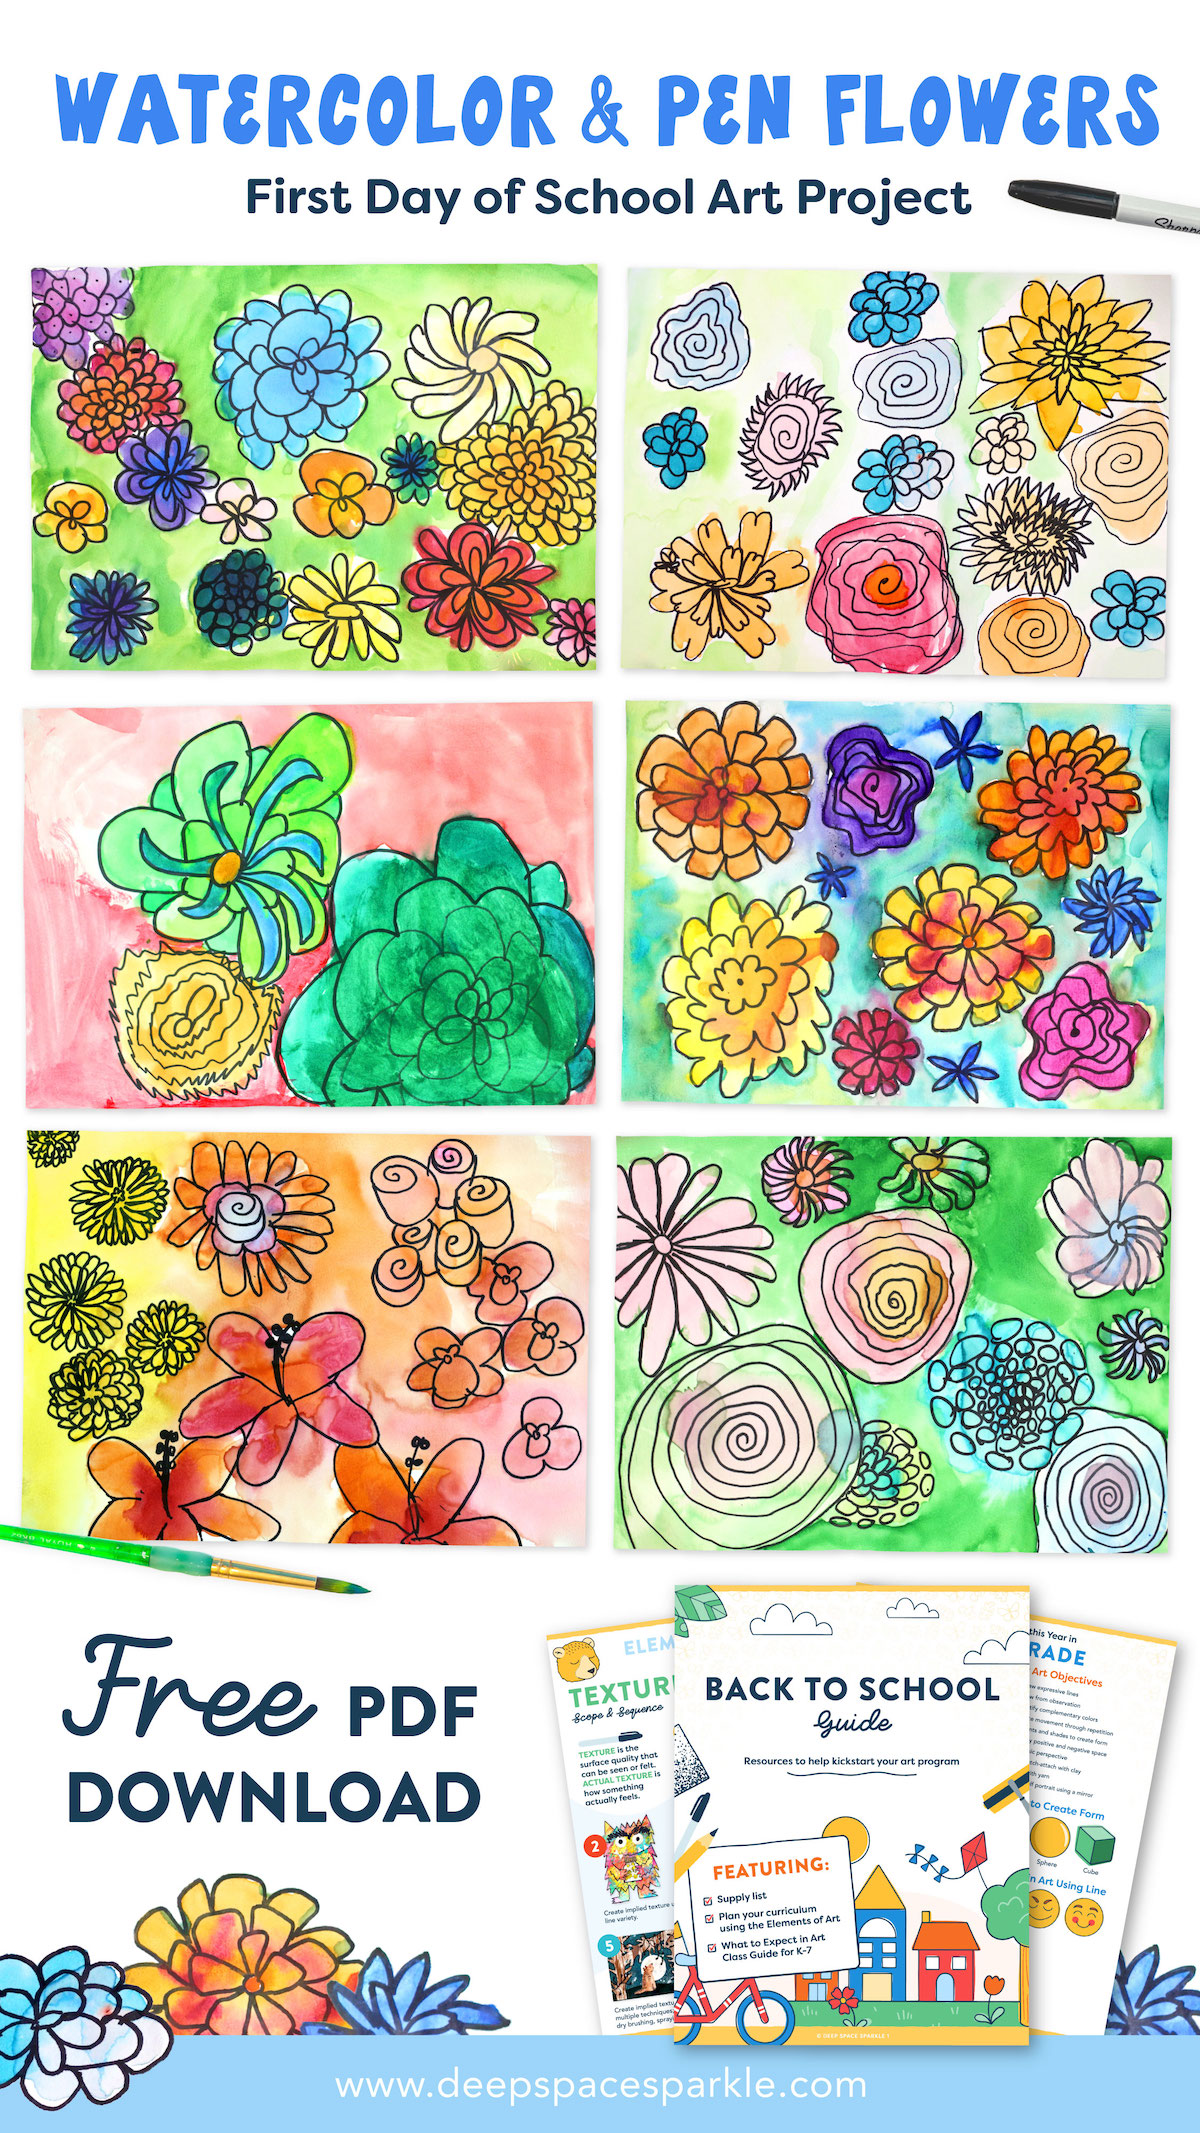 Watercolor Pen Flowers for the First Day of School